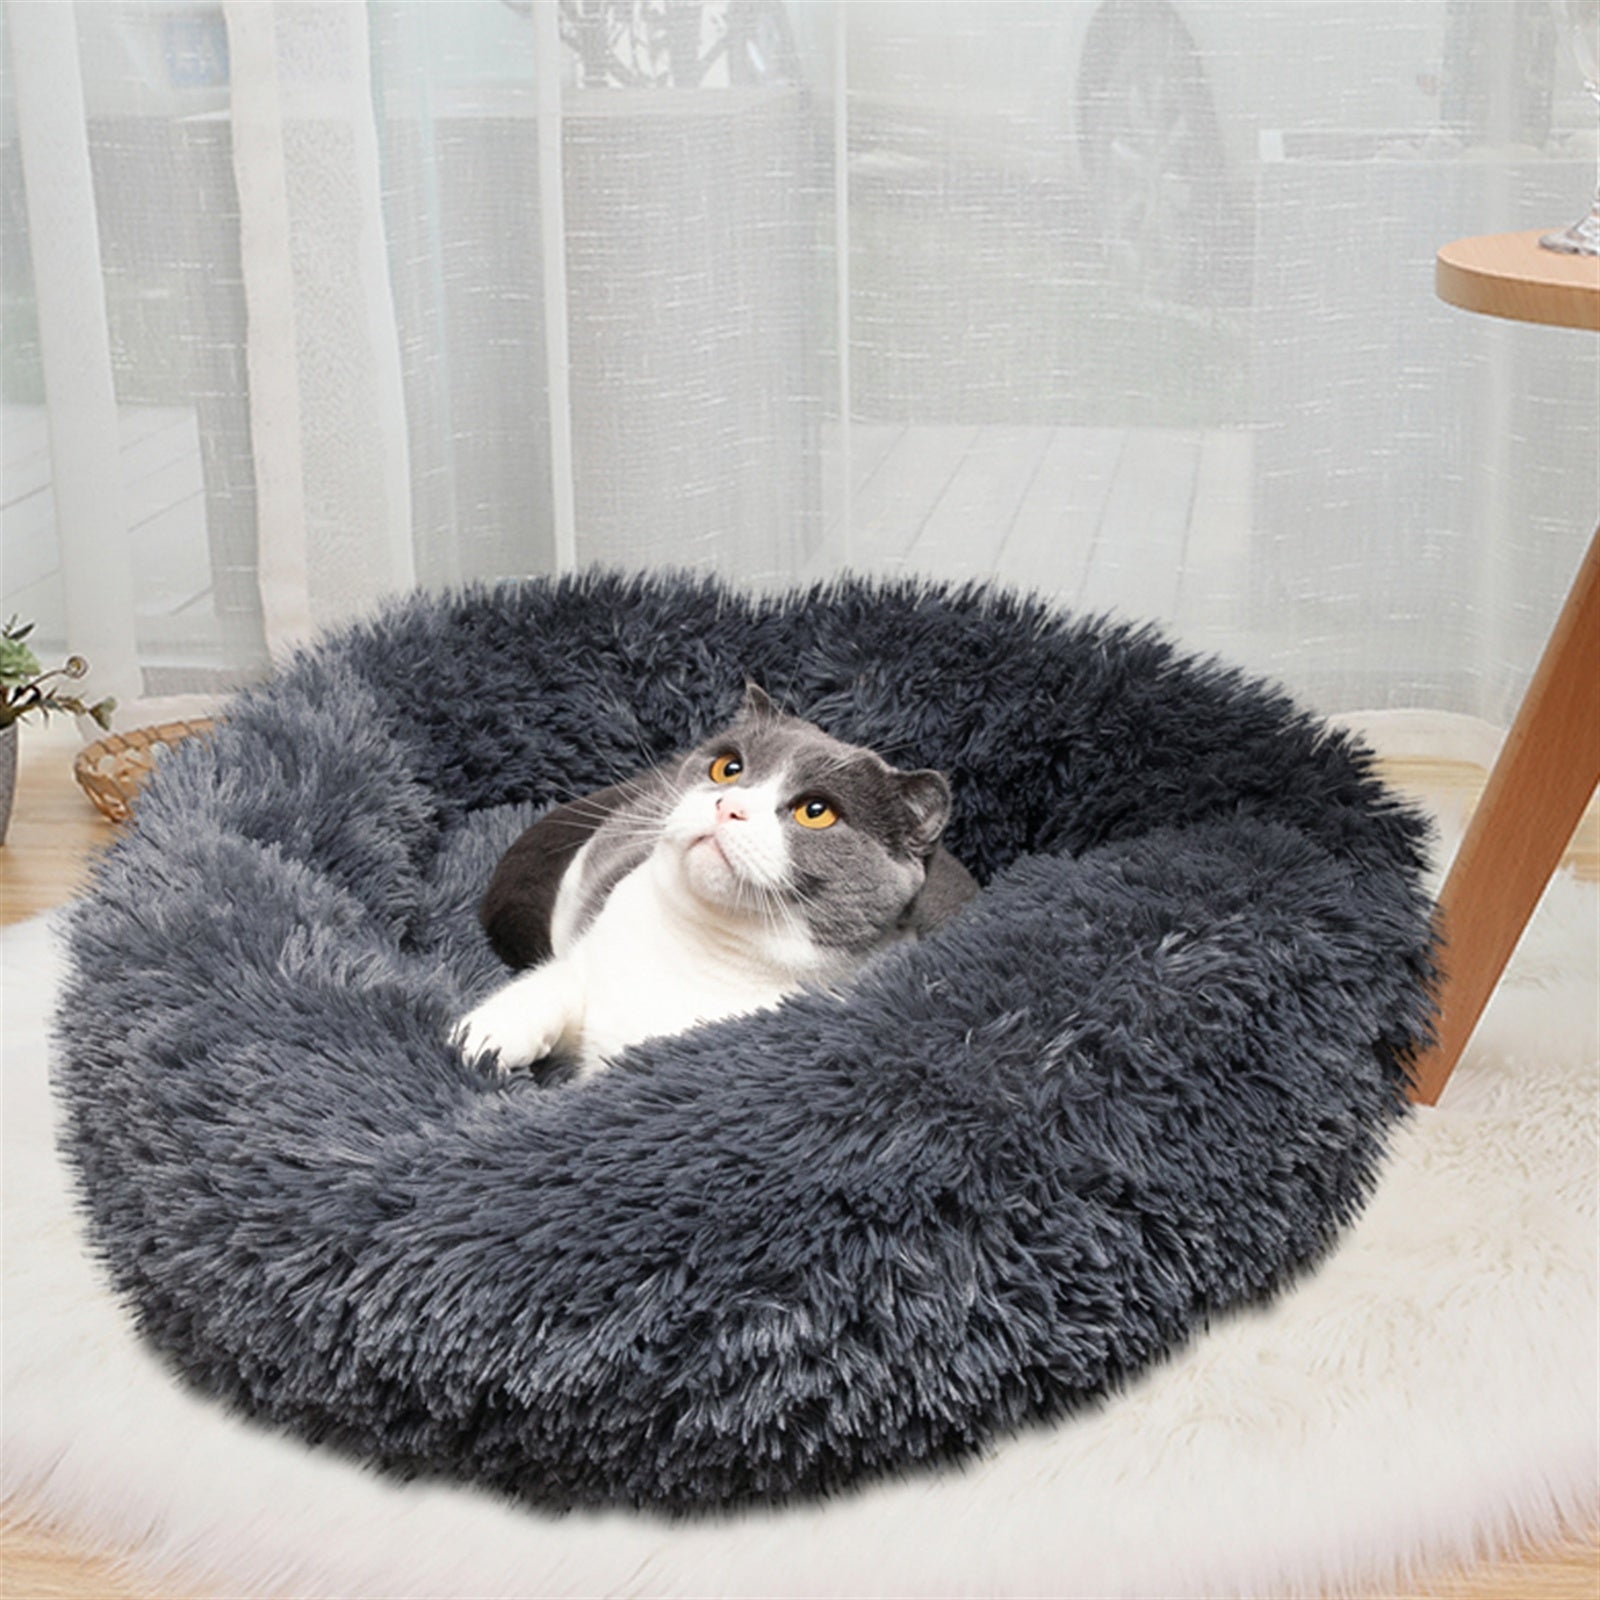 Dog Bed Cat Bed Comfortable Donut Cuddler Round Dog Pillow Bed Nest Anti-Slip Faux Fur Pet Bed Ultra Soft Washable Pet Cushion Bed for Dog Cat Joint-Relief and Improved Sleep YF